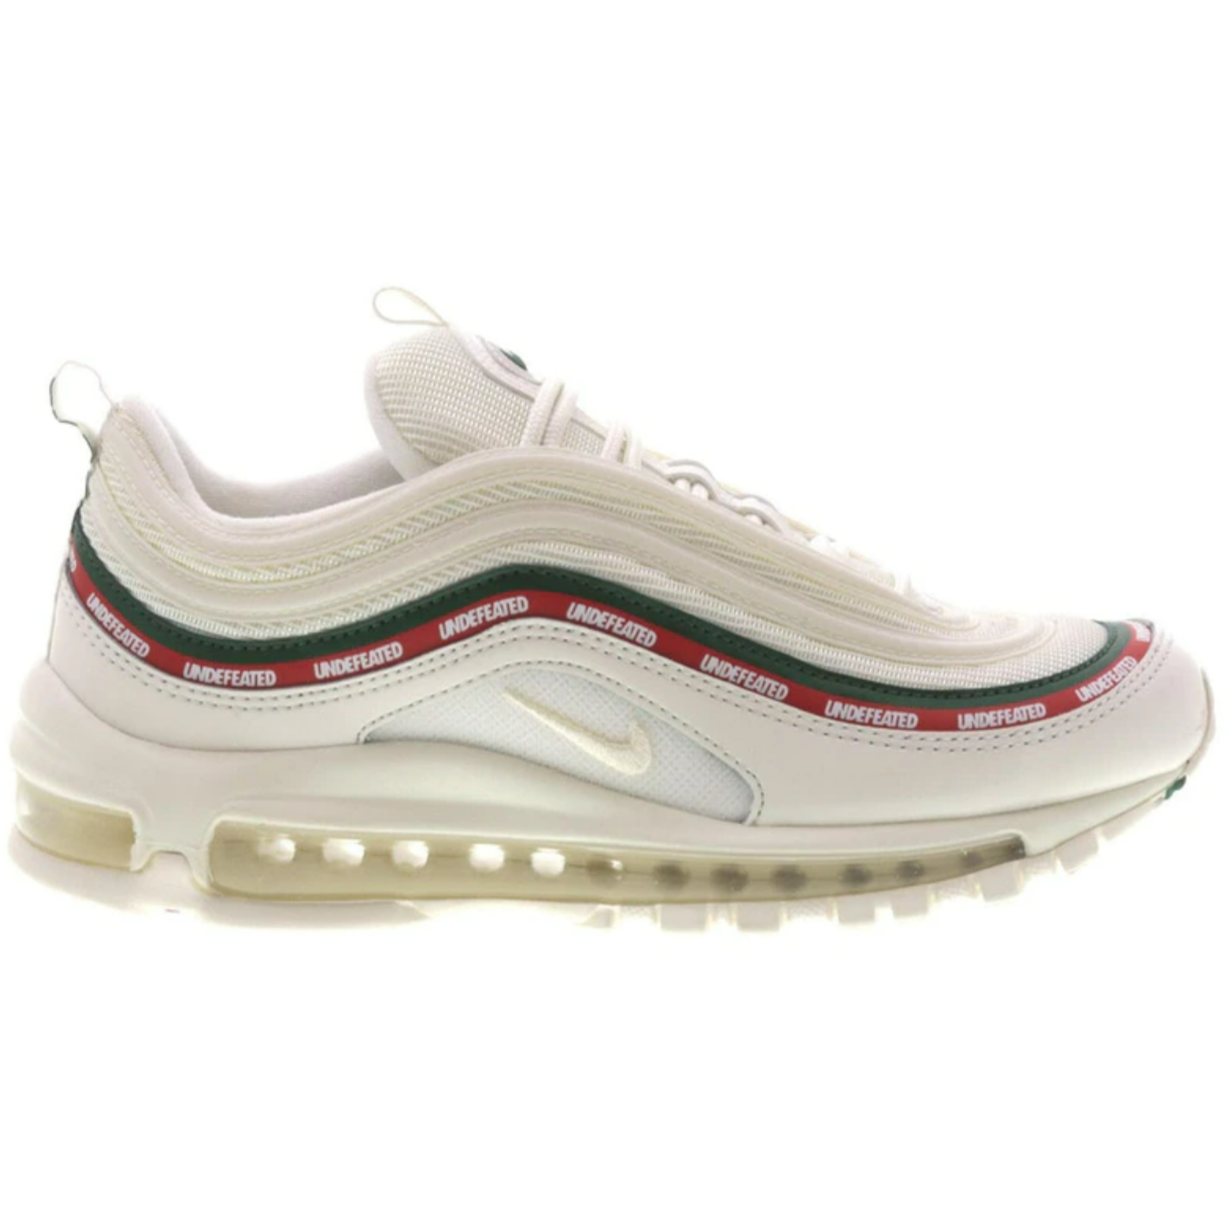 Nike Air Max 97 UNDFTD White from Nike